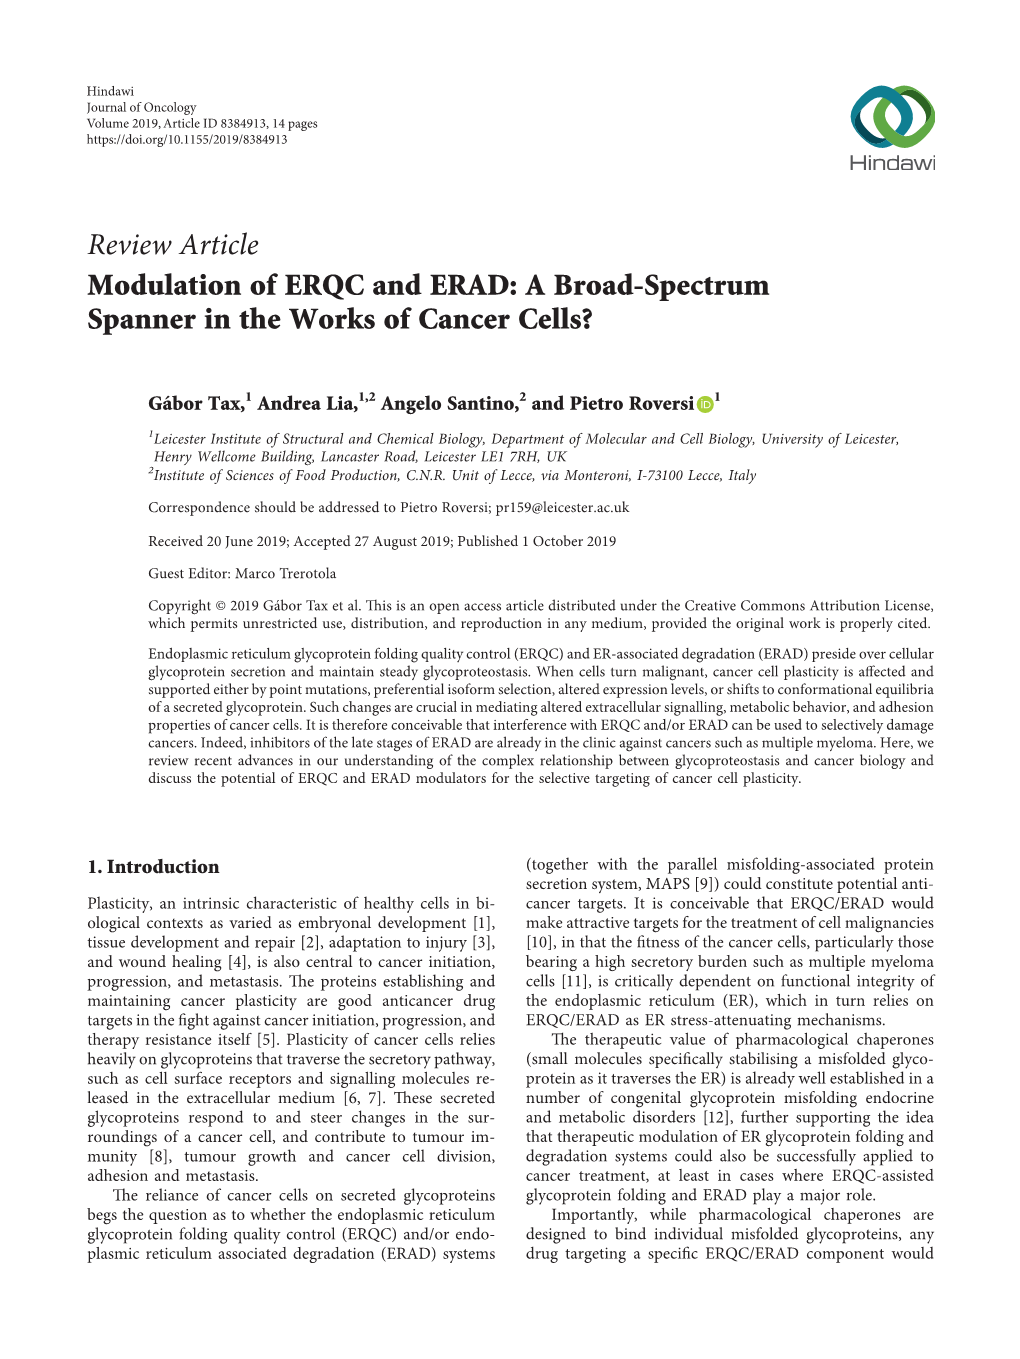 Modulation of ERQC and ERAD: a Broad-Spectrum Spanner in the Works of Cancer Cells?